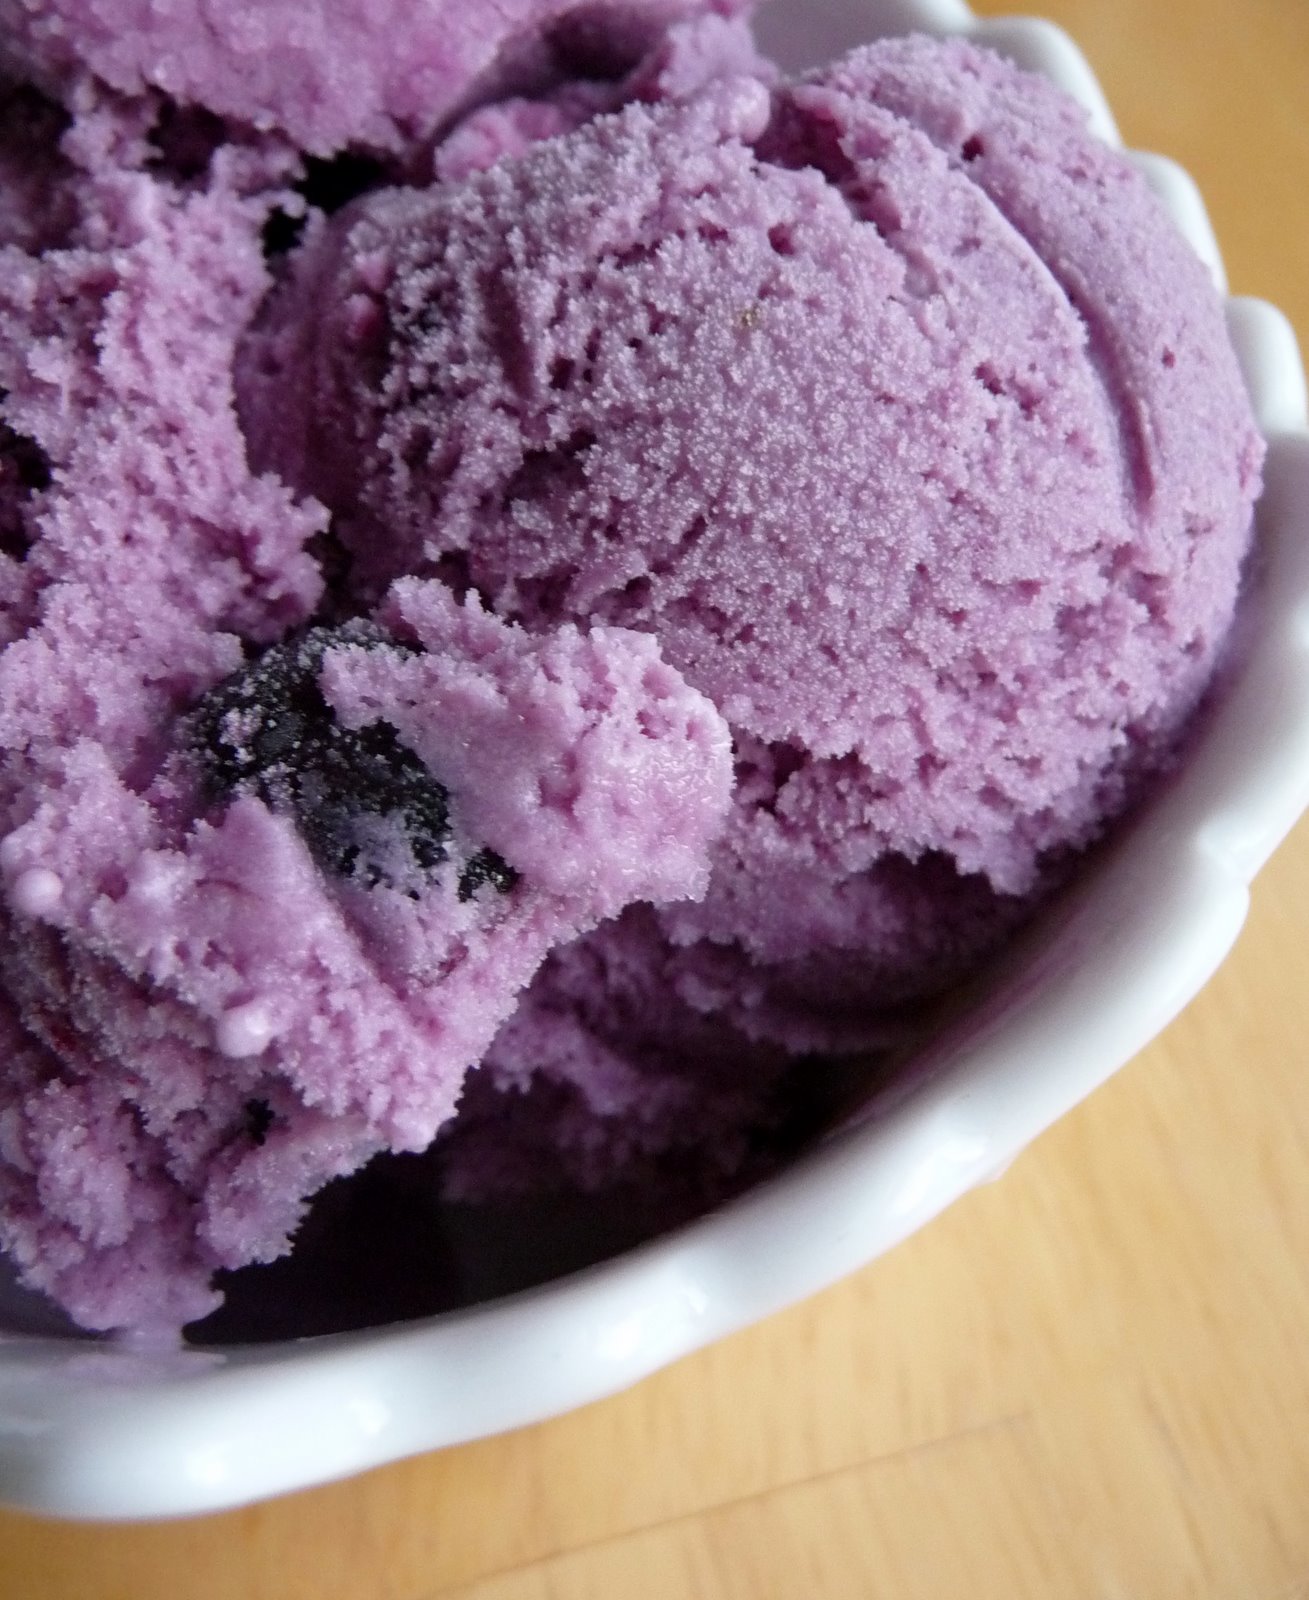 The successful inventor of ice cream soda, the brilliant Robert Green promised his fans that he would create a grape flavored ice cream in time for the 1876 World Fair. However, Green was unaware that grapes contain the molecule Anthocyanin, which prevents freezing. He failed miserably.